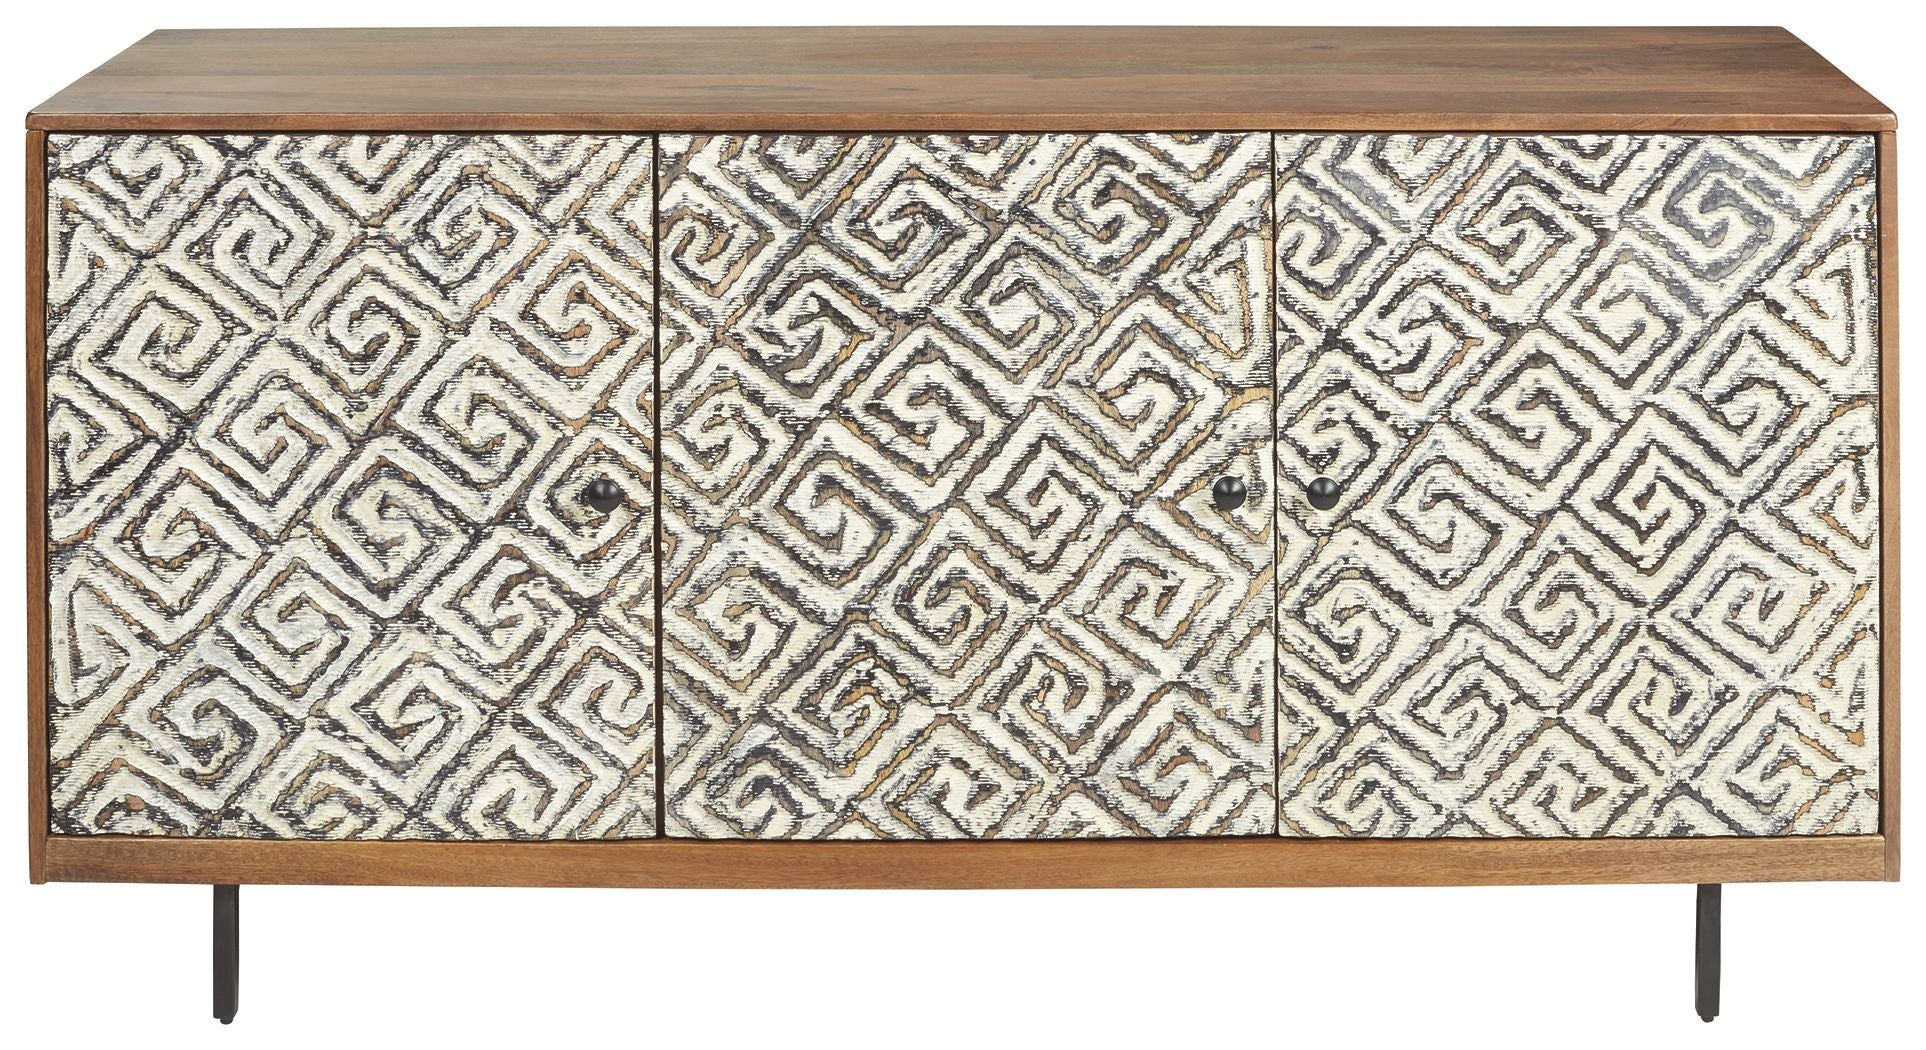 Kerrings - Brown / Black/white - Accent Cabinet